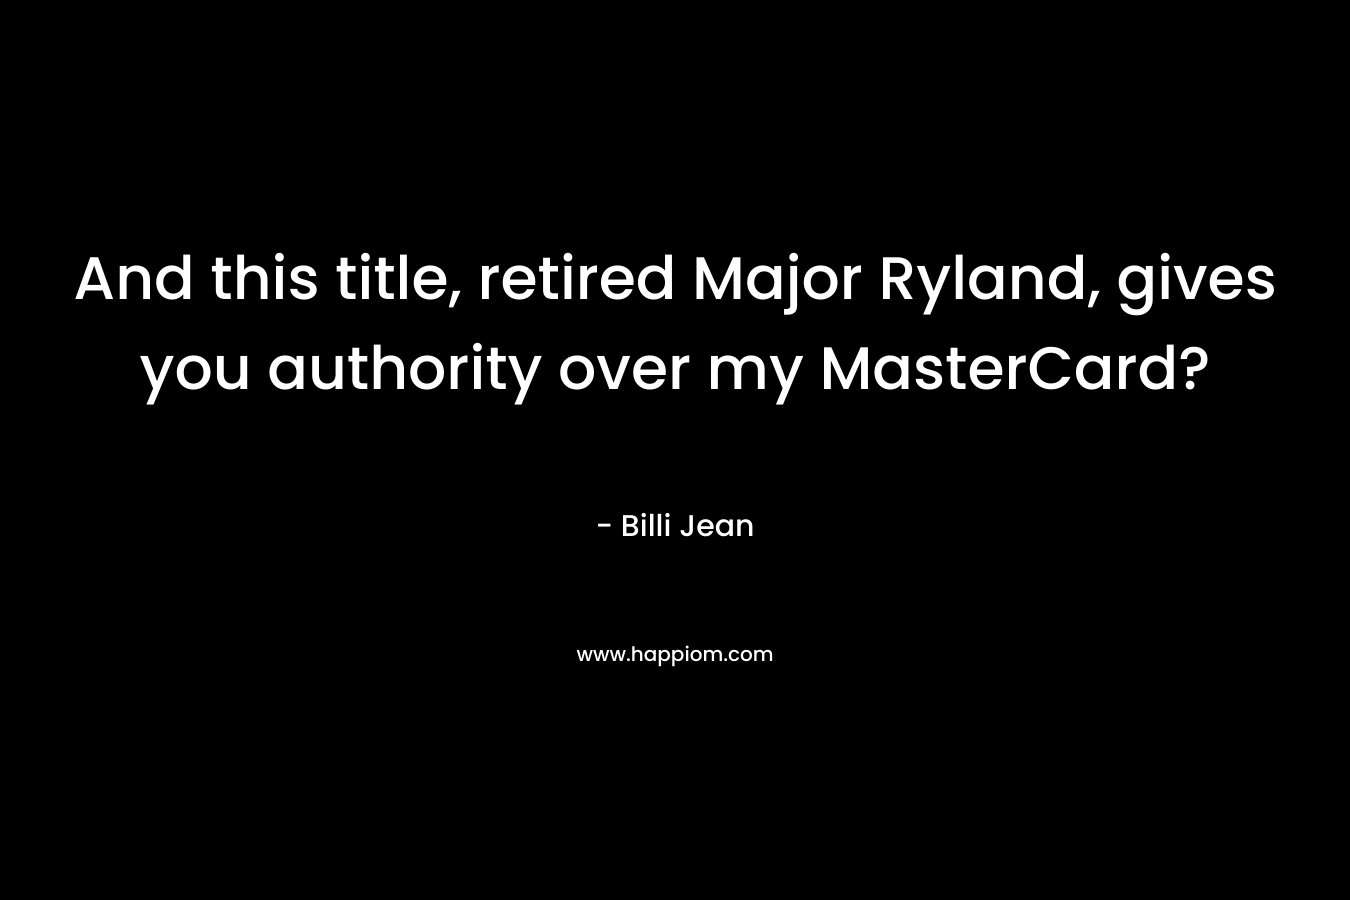 And this title, retired Major Ryland, gives you authority over my MasterCard?